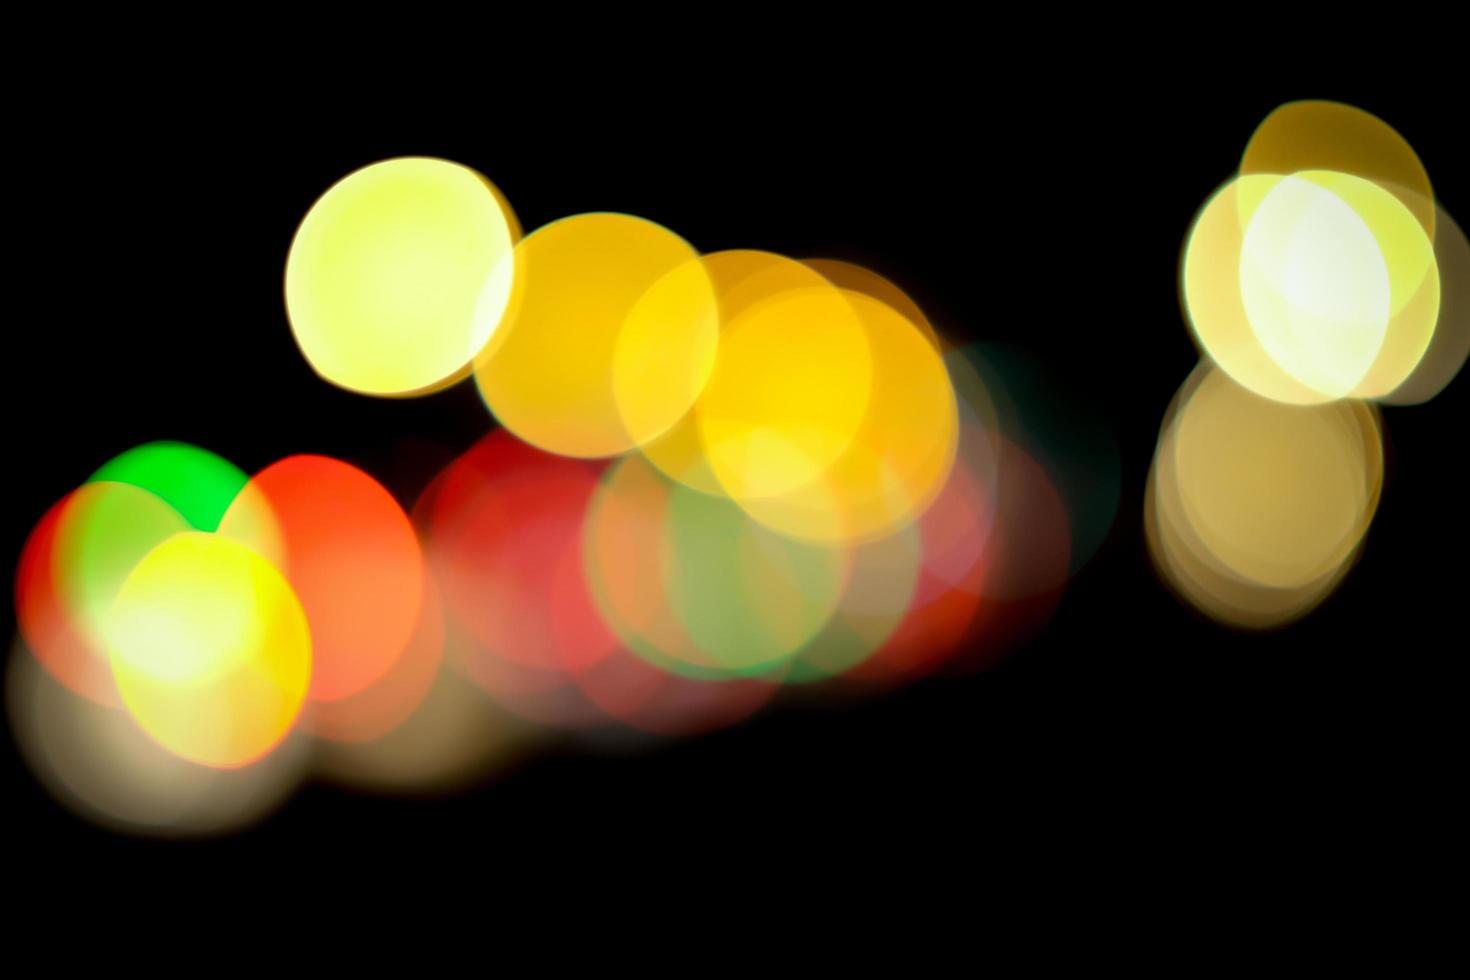 Abstract blurry lights in the dark photo